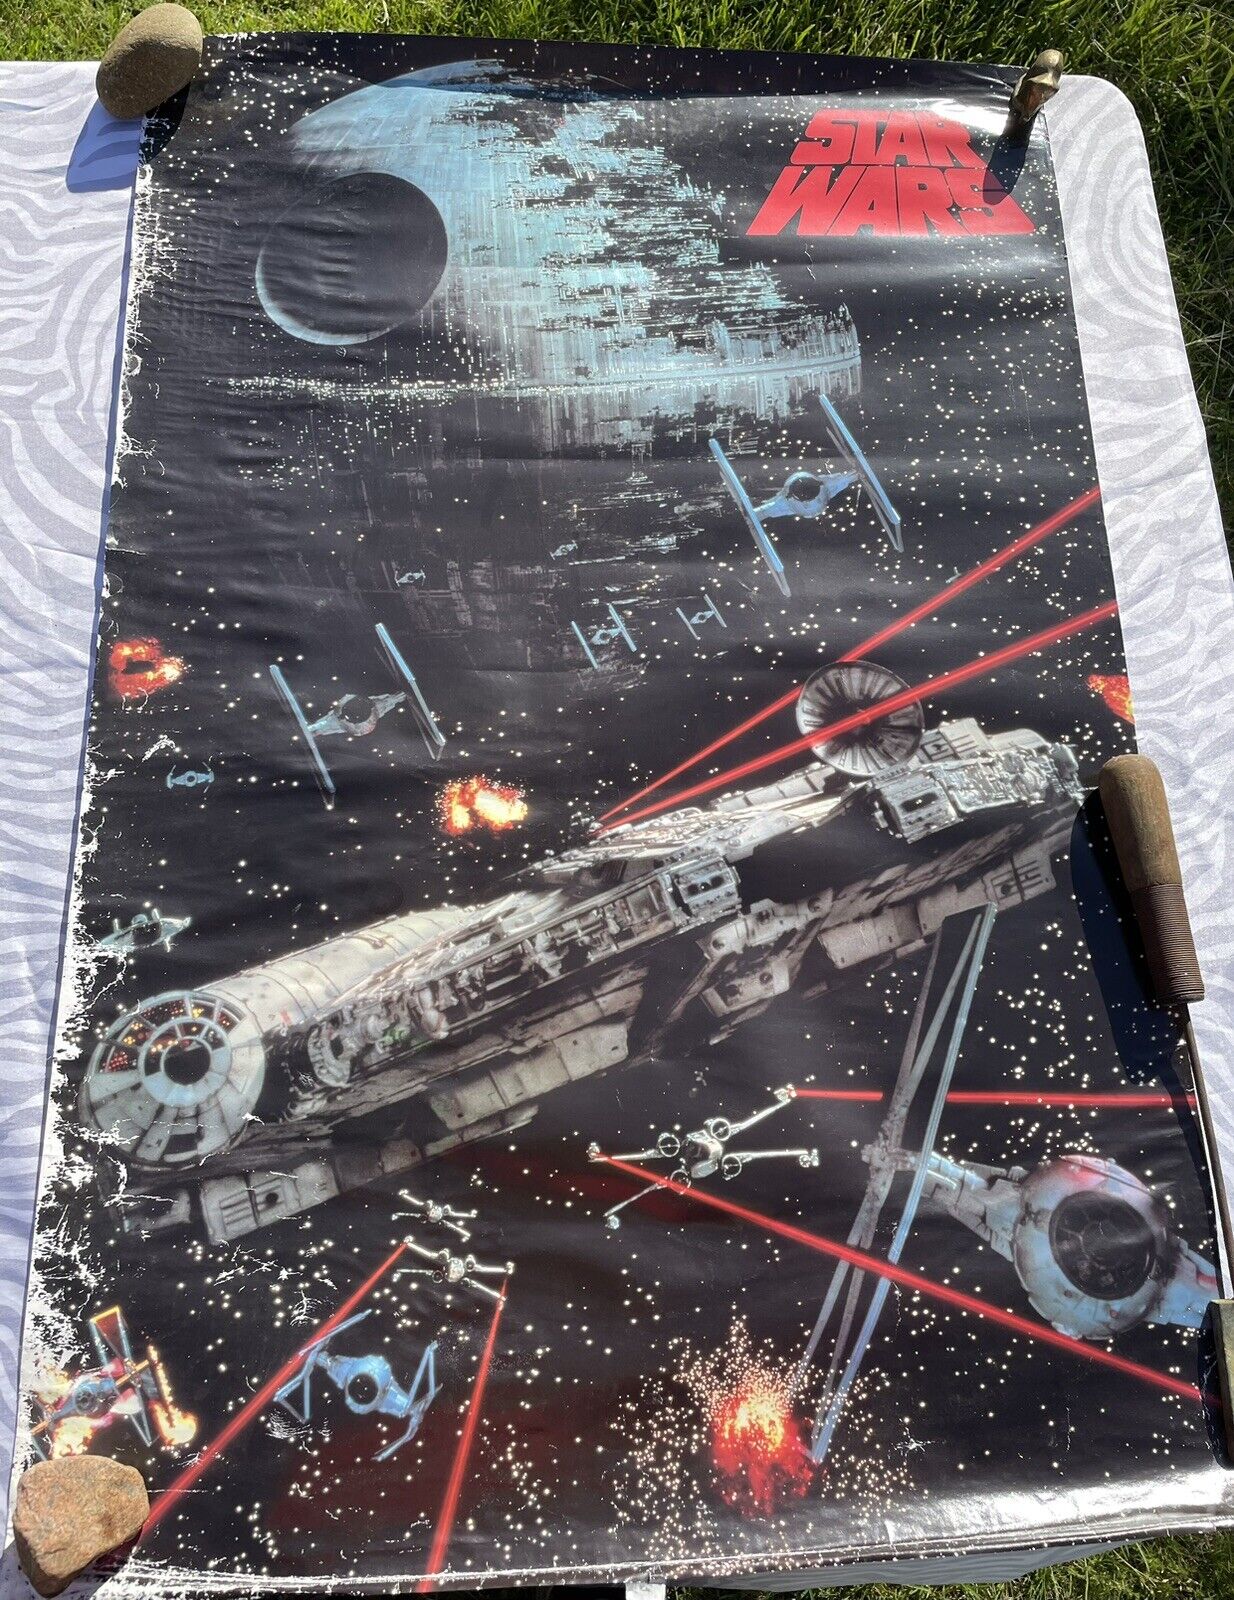 STAR WARS posters 1977￼￼-1988 Ara Unique One Of A Kind